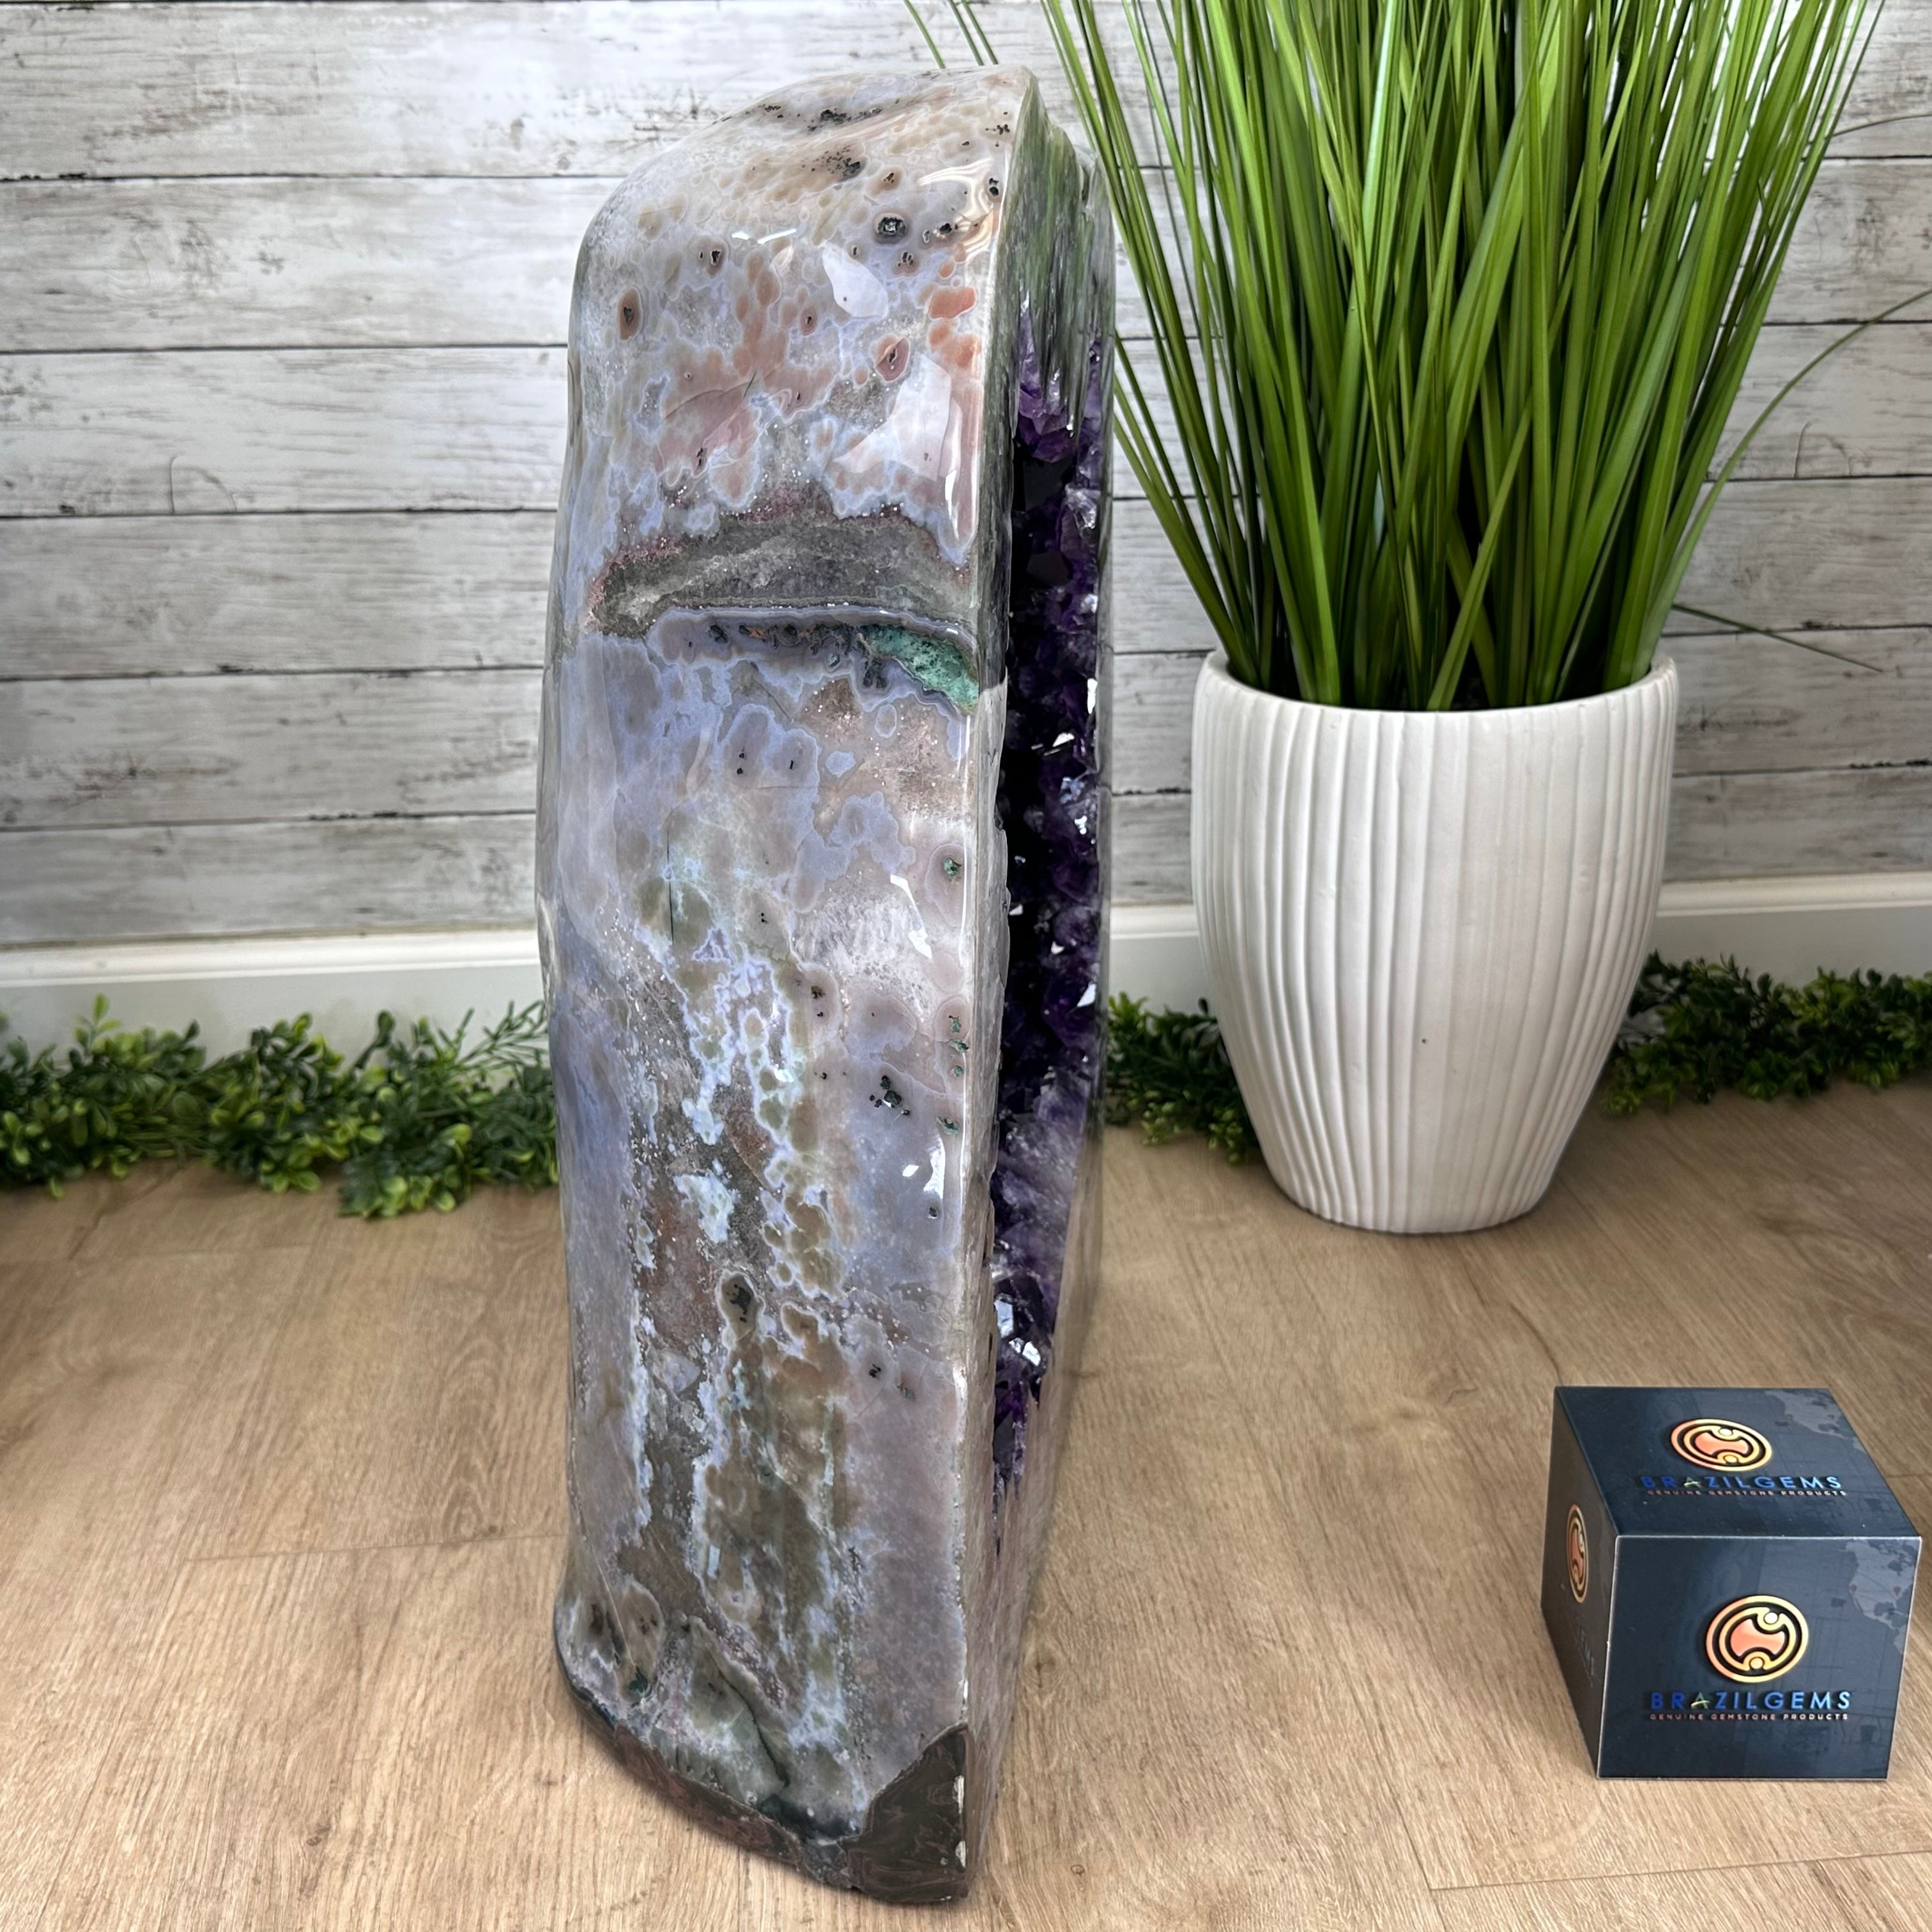 Super Quality Polished Brazilian Amethyst Cathedral, 161.6 lbs & 21.25" tall Model #5602-0072 by Brazil Gems - Brazil GemsBrazil GemsSuper Quality Polished Brazilian Amethyst Cathedral, 161.6 lbs & 21.25" tall Model #5602-0072 by Brazil GemsPolished Cathedrals5602-0072